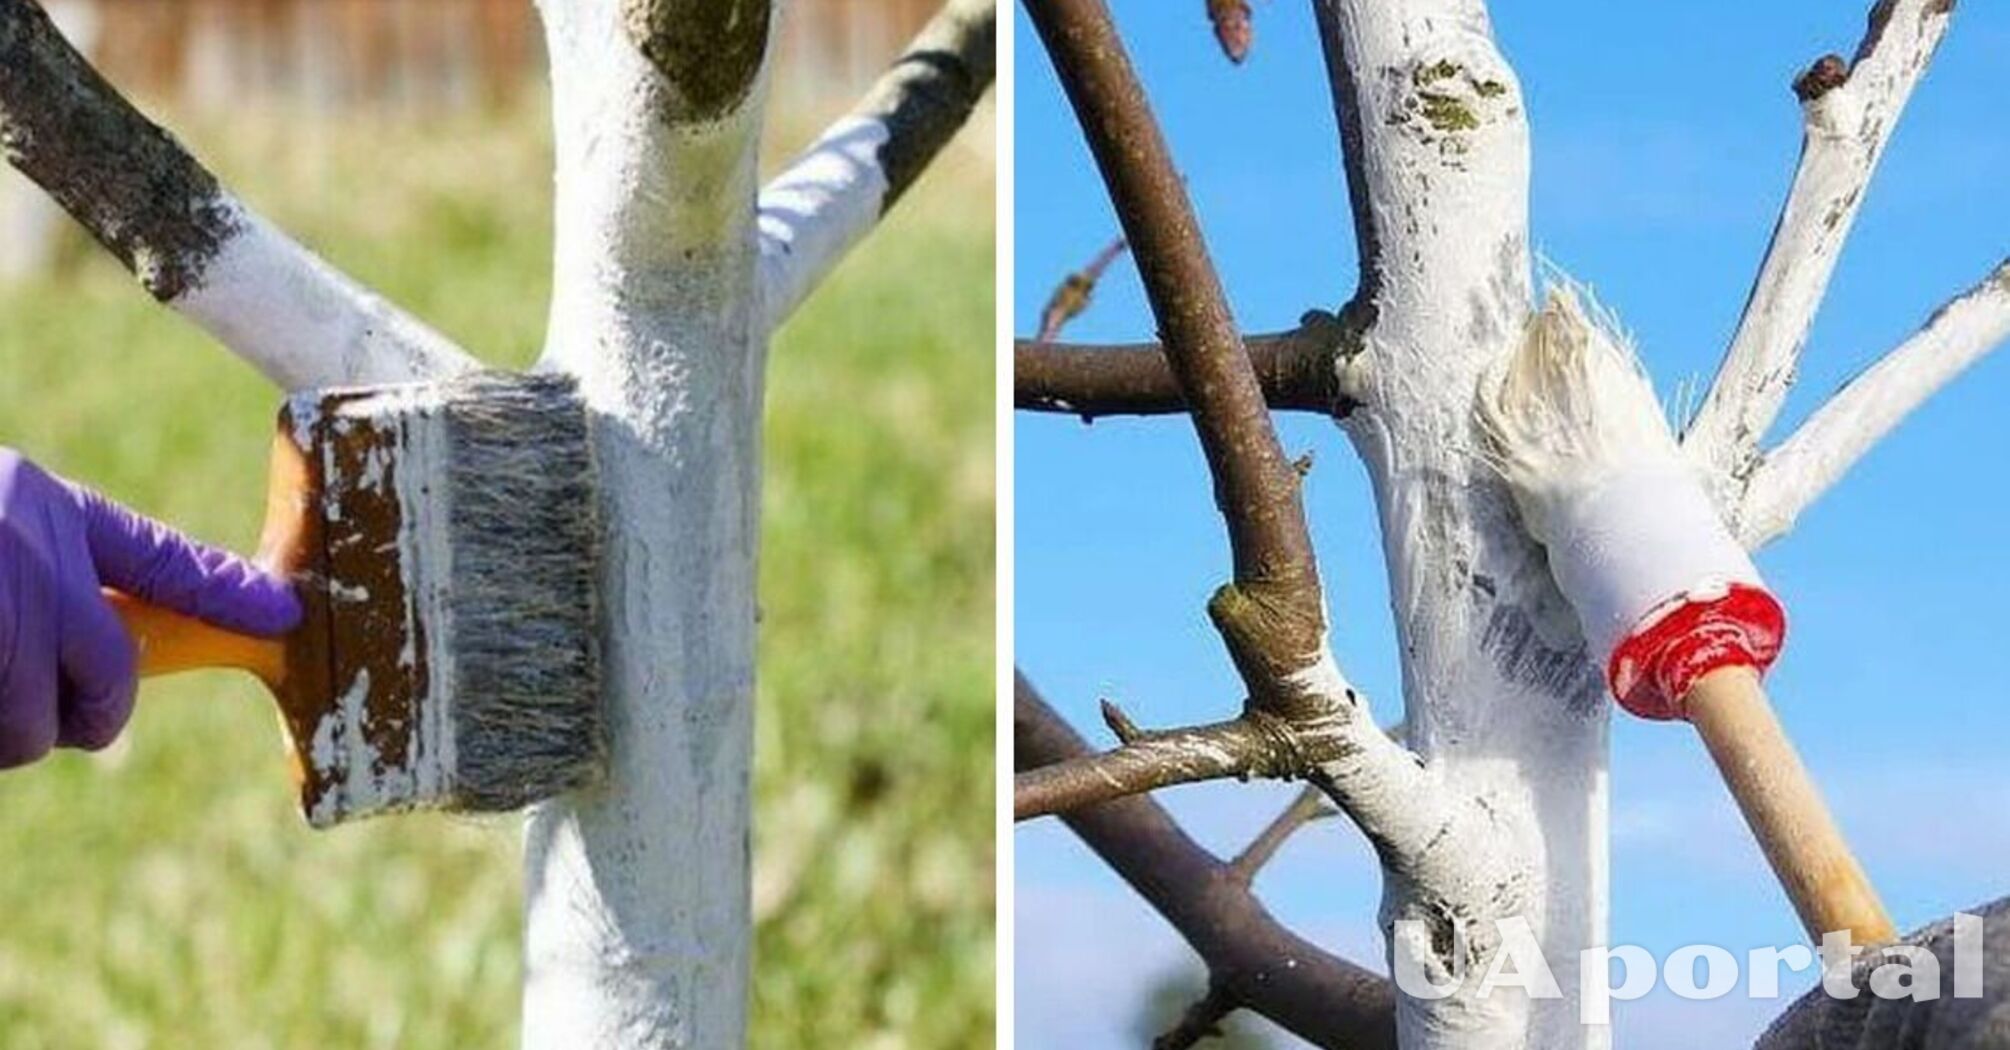 How to whitewash trees in winter to protect plants from pests and diseases